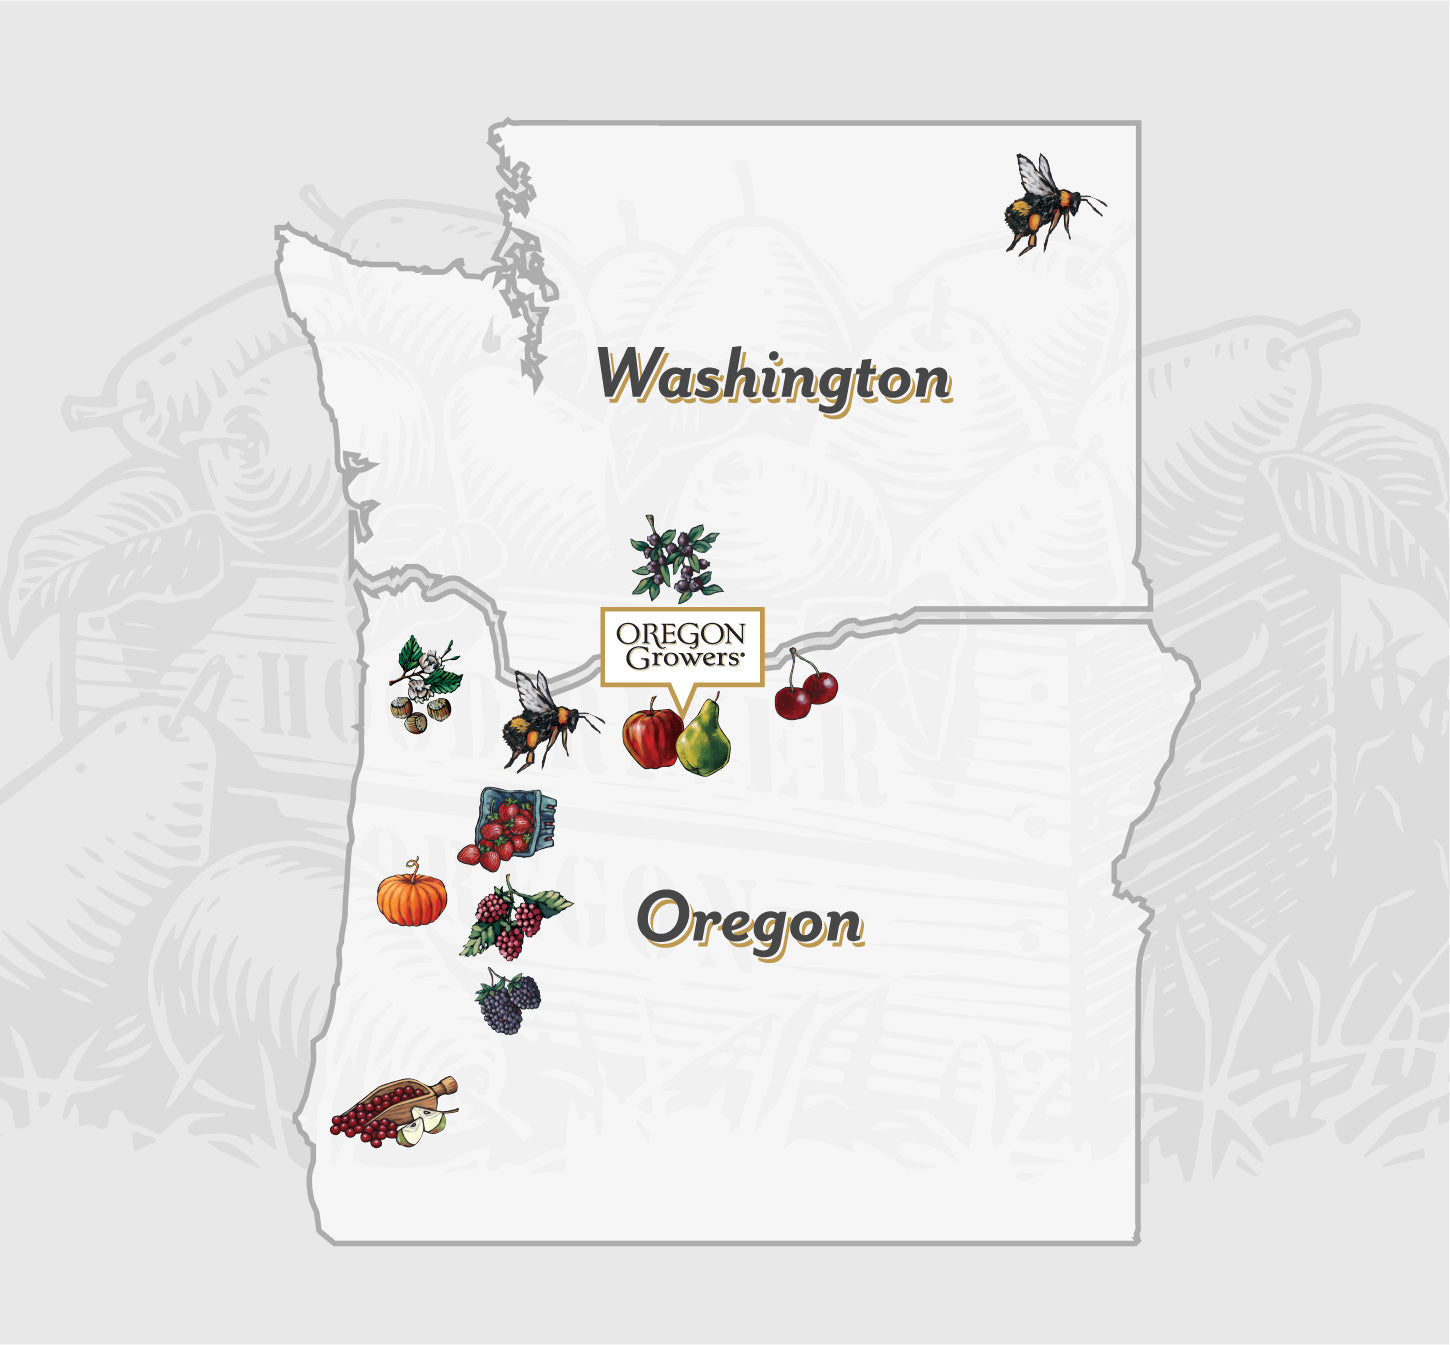 Map of Washington and Oregon showing location of Oregon Growers farming partners and products.